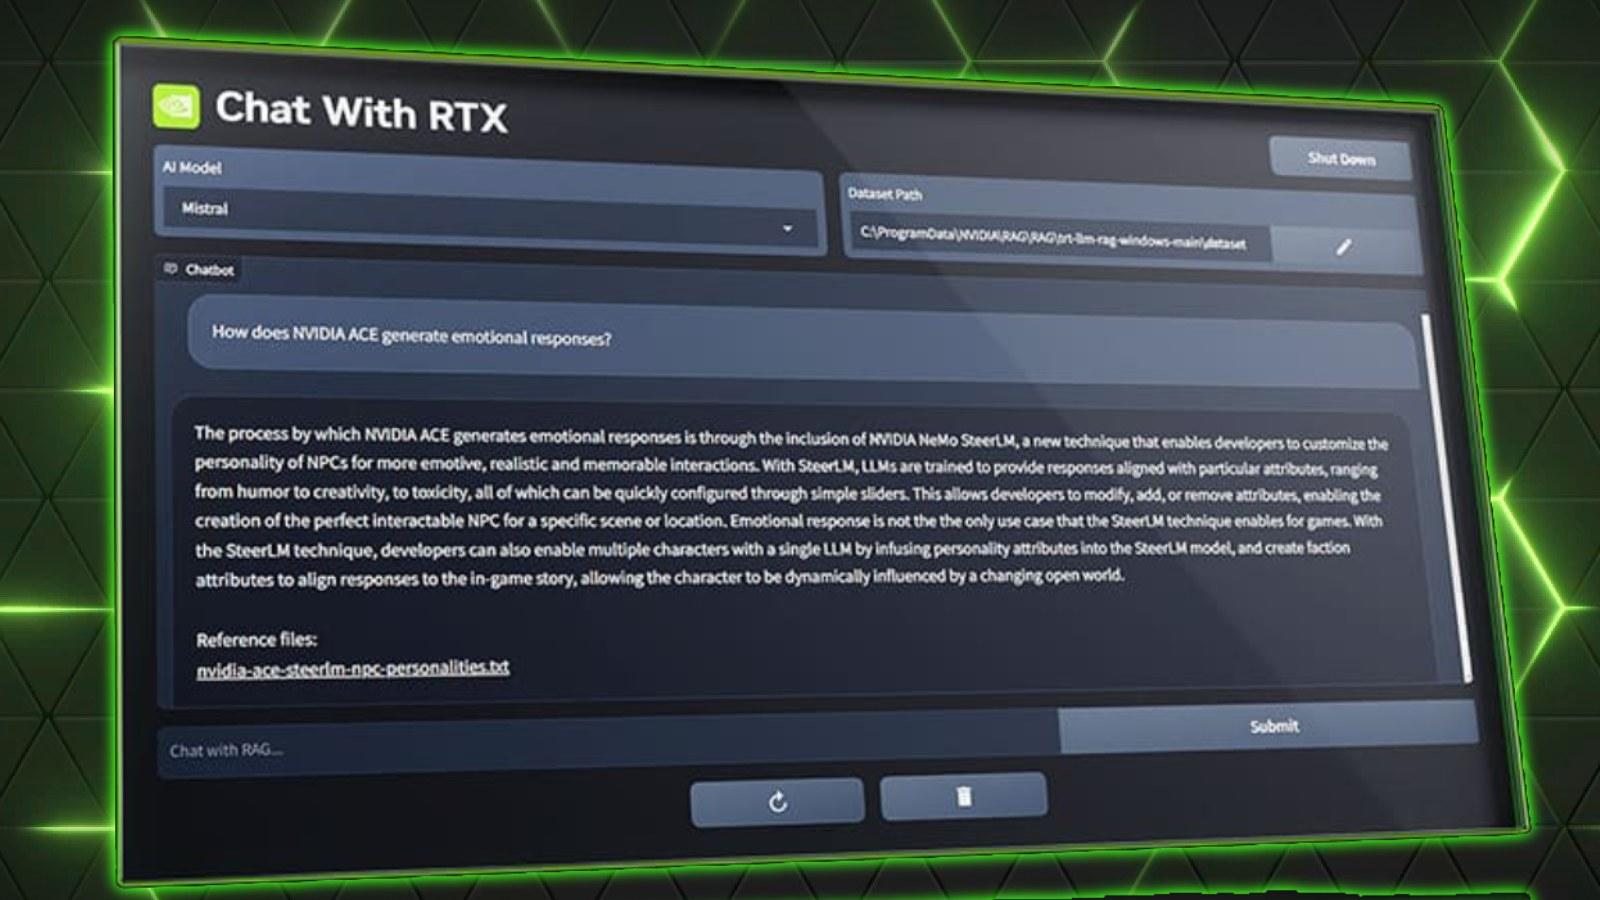 ChatRTX app on a dark green background with a hex pattern